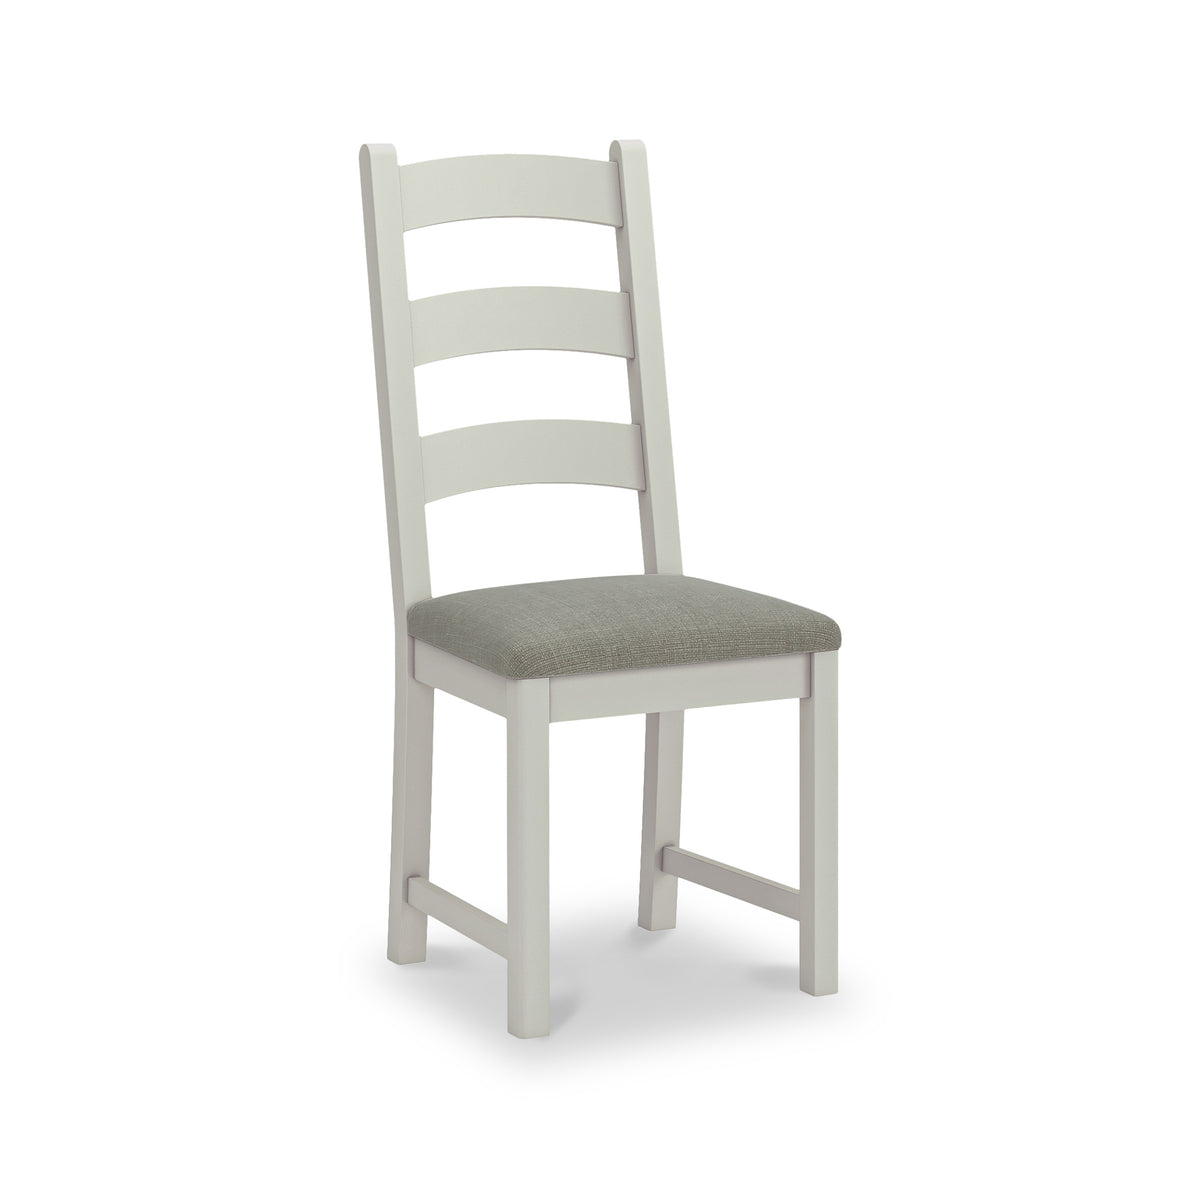 Penzance Dining Chair in Stone Grey with a Grey Cushion from Roseland Furniture